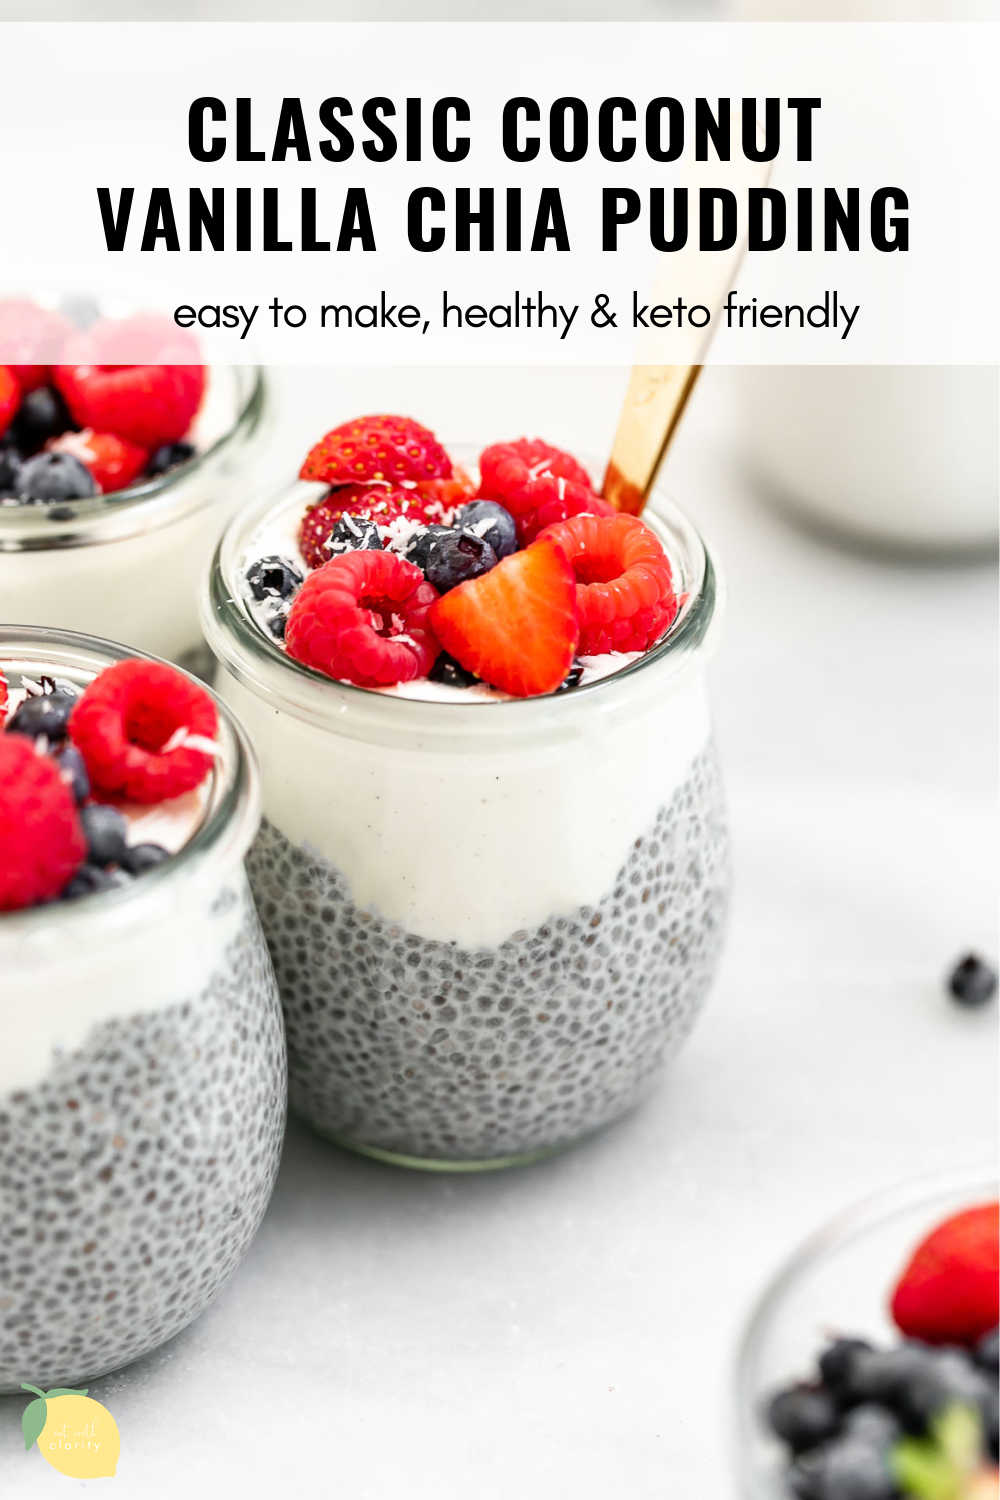 How To Make Chia Seed Pudding | Eat With Clarity